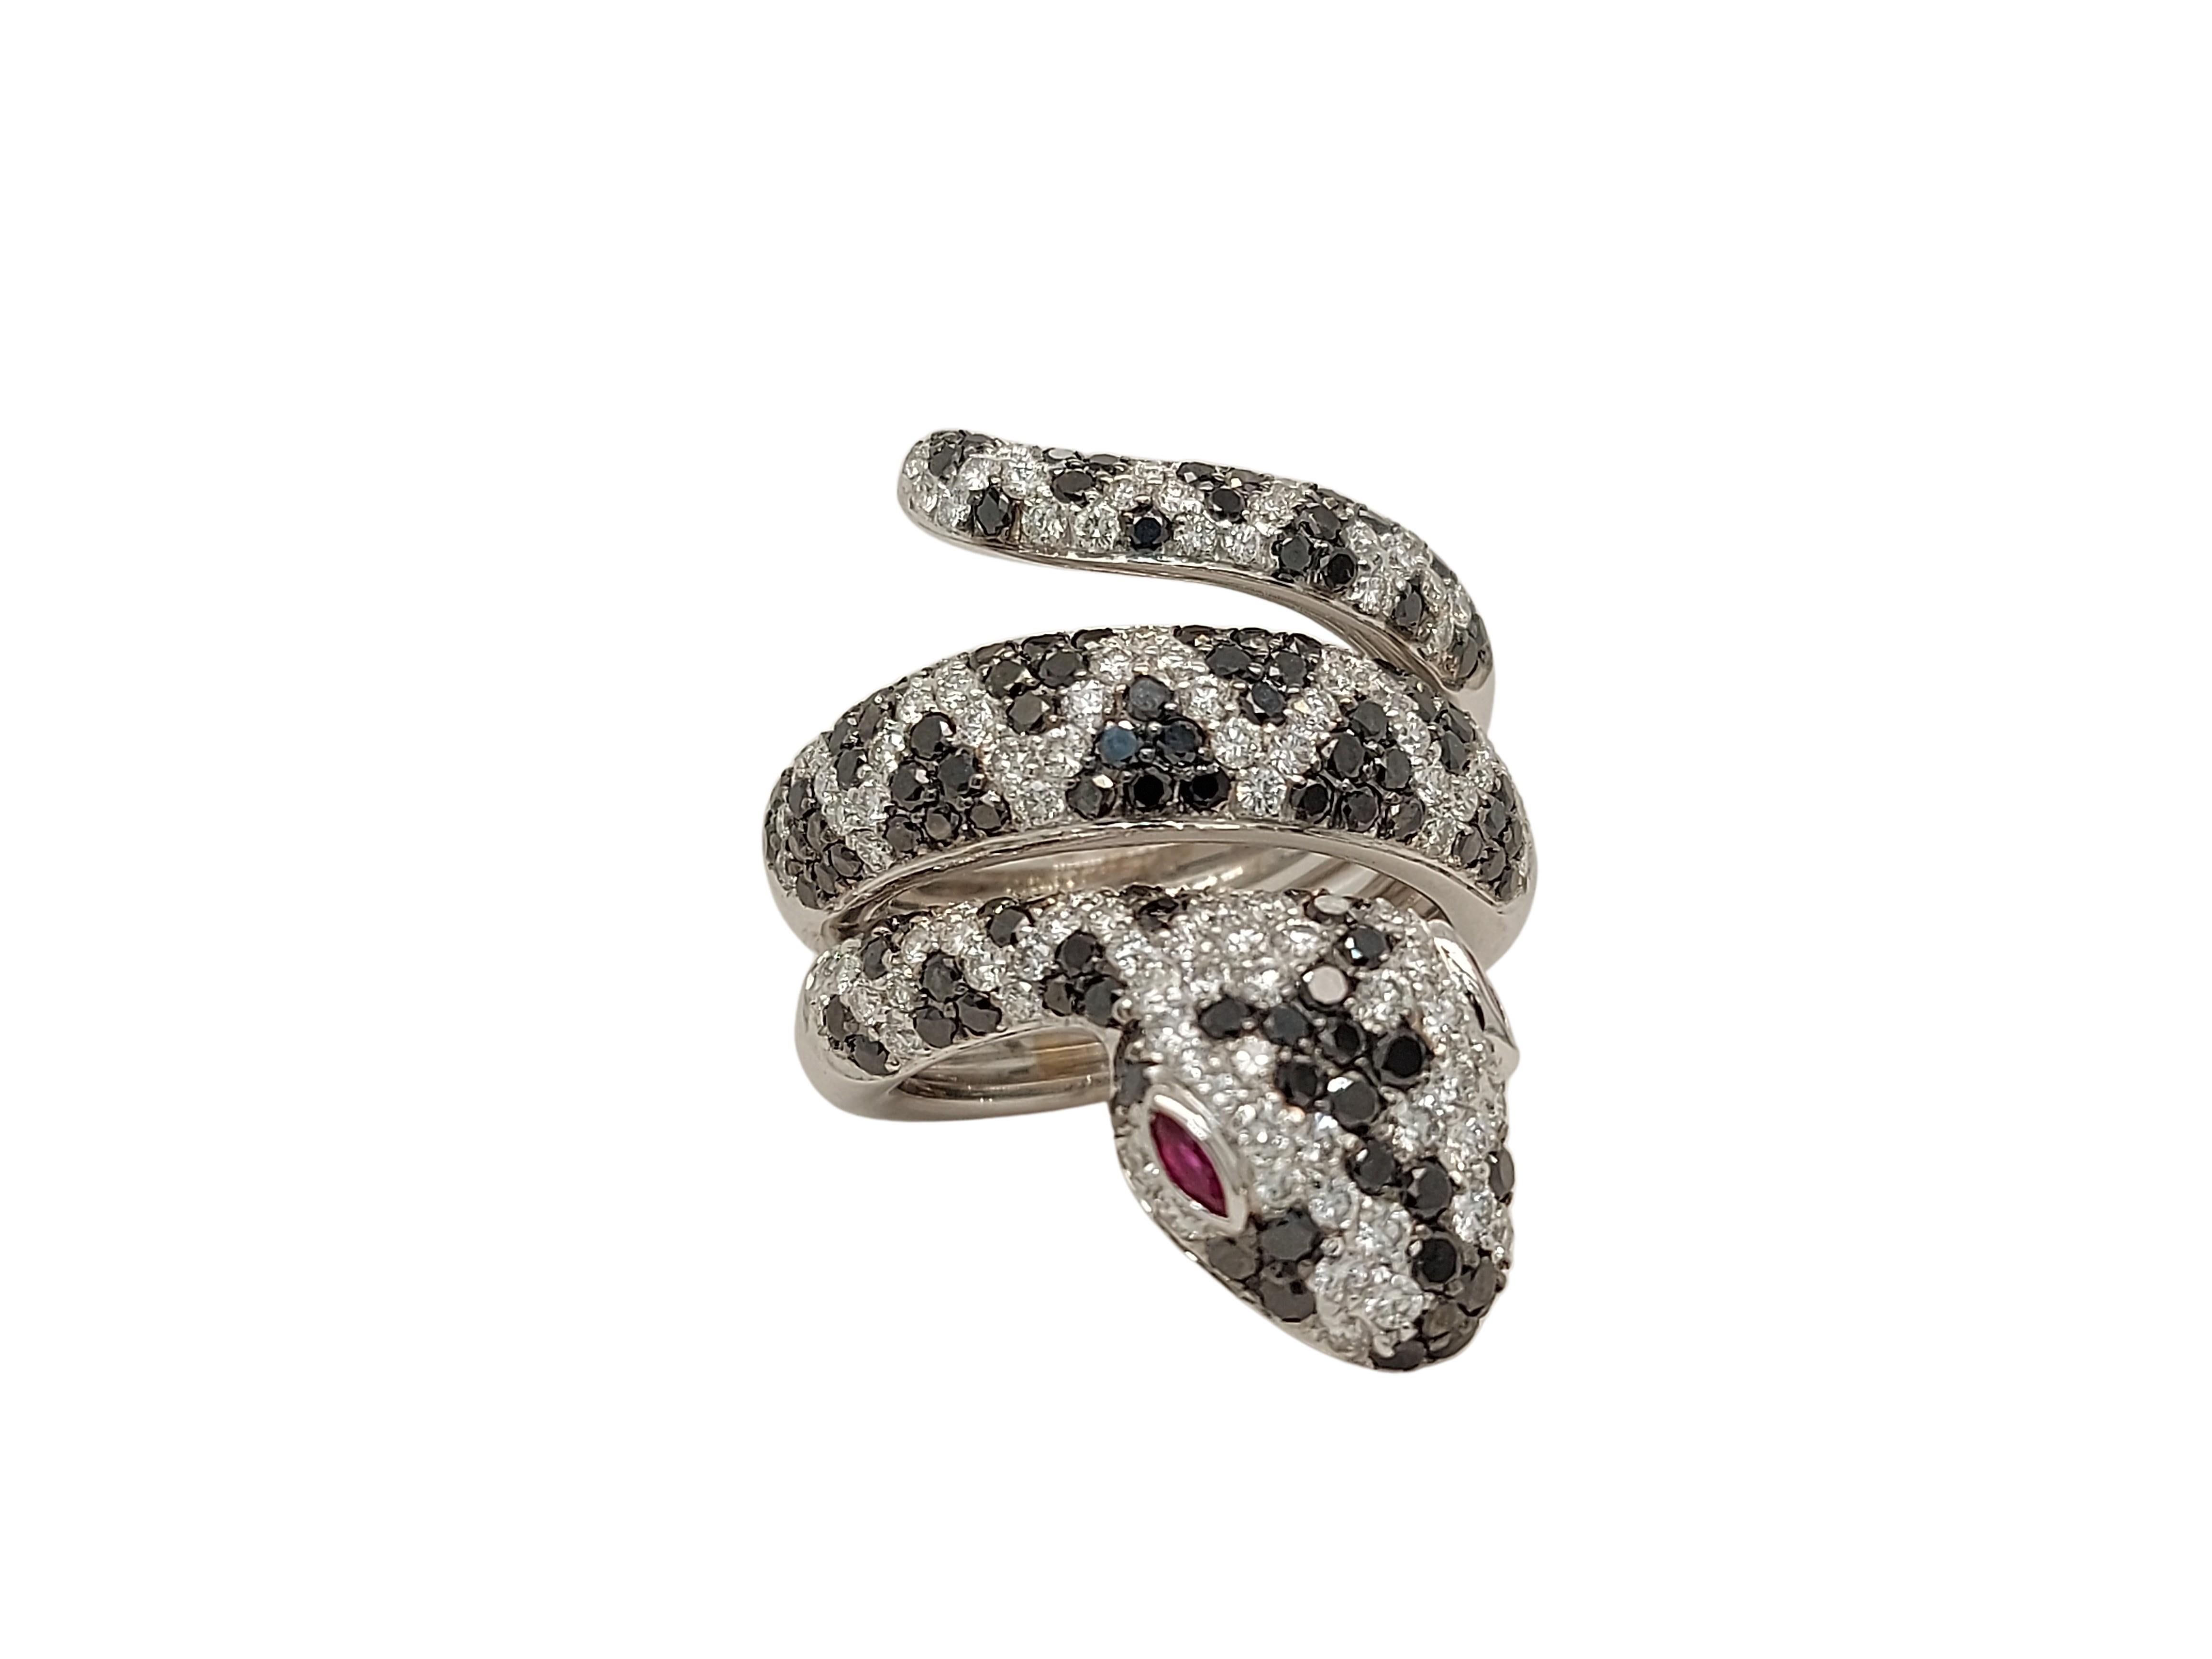 Brilliant Cut 18kt White Gold Snake Ring with 2.04ct Black & 1.75ct White Diamonds & Ruby Eyes For Sale